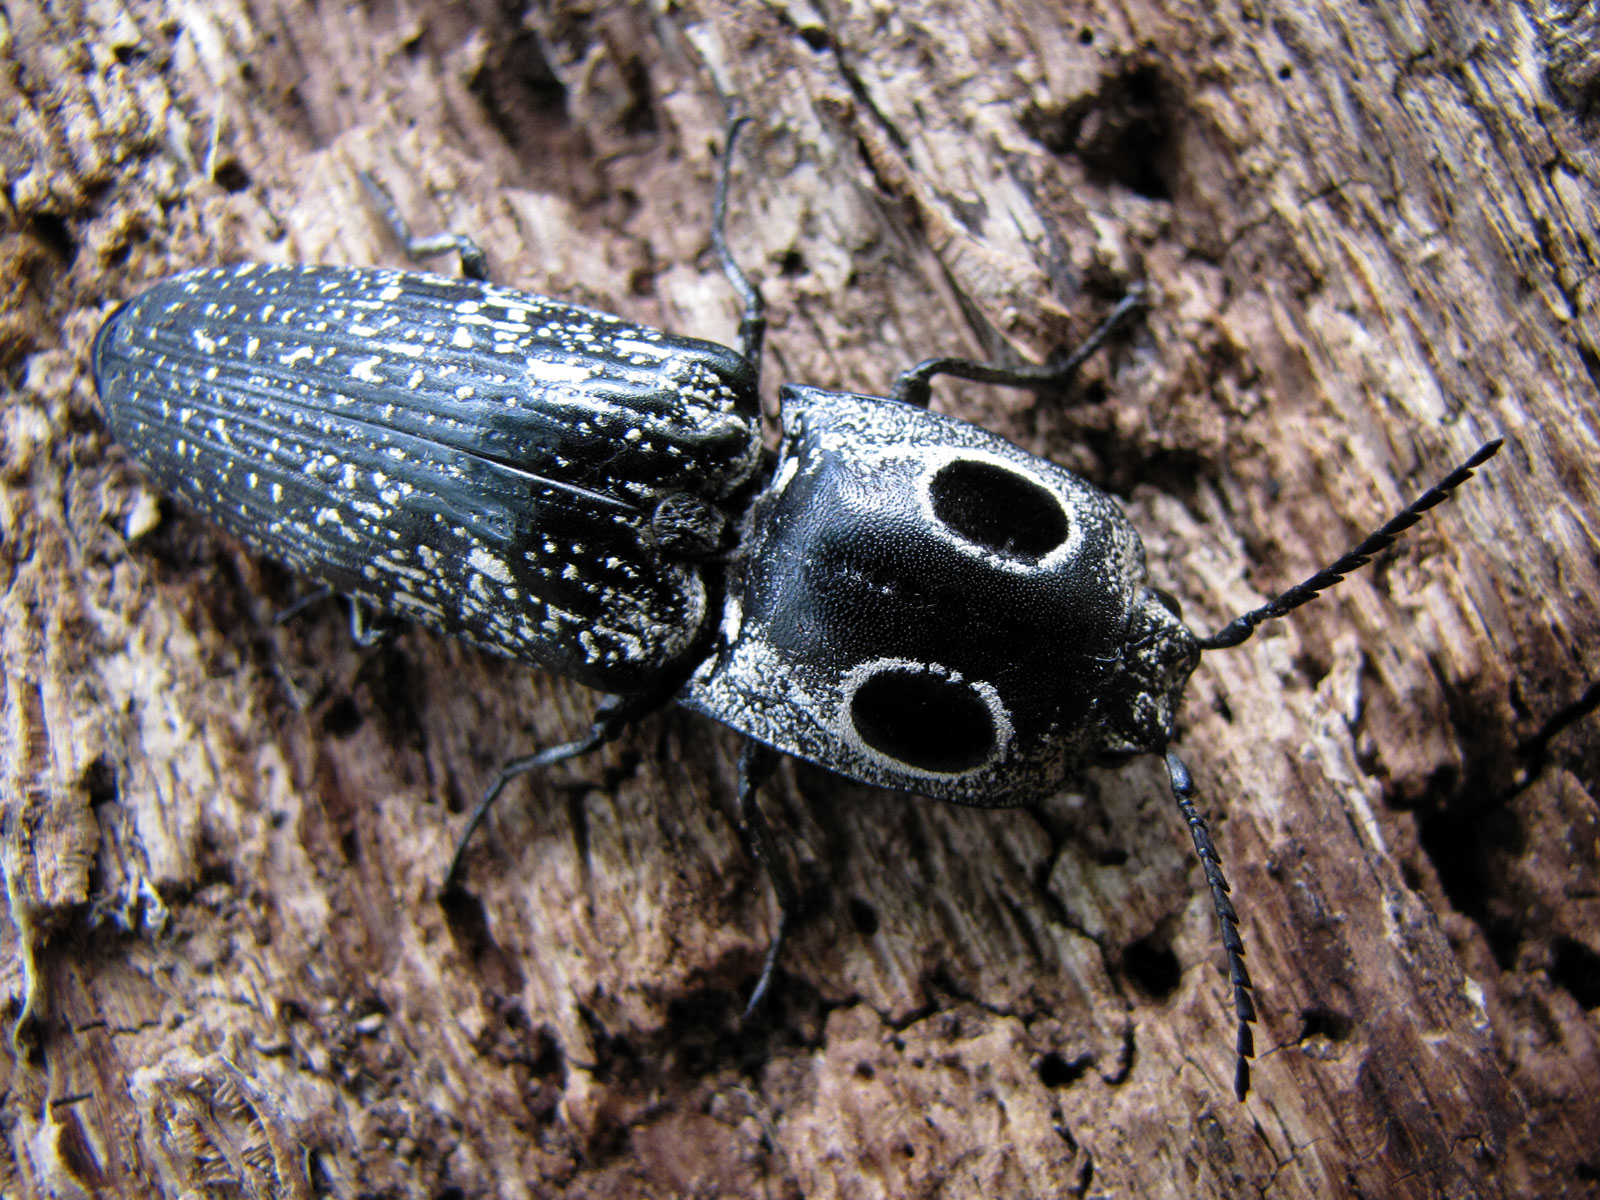 the black insect with grey spots is standing on the wooden